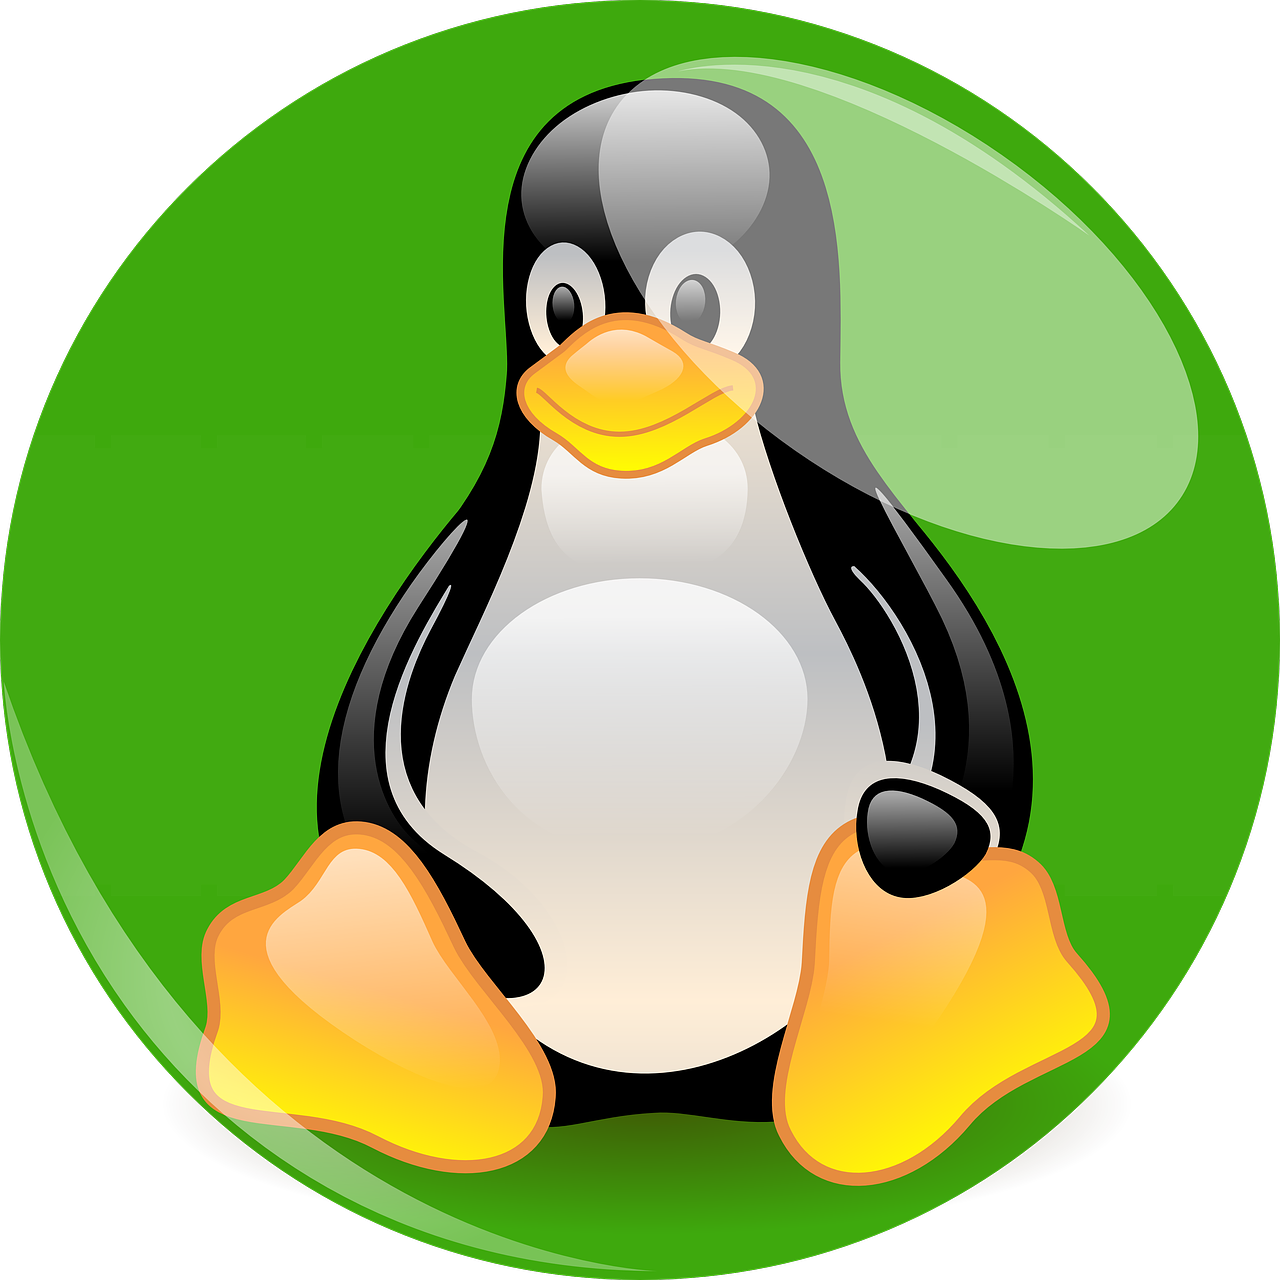 penguin,linux,mascot,cartoon character,figure,green,drawing,free pictures, free photos, free images, royalty free, free illustrations, public domain